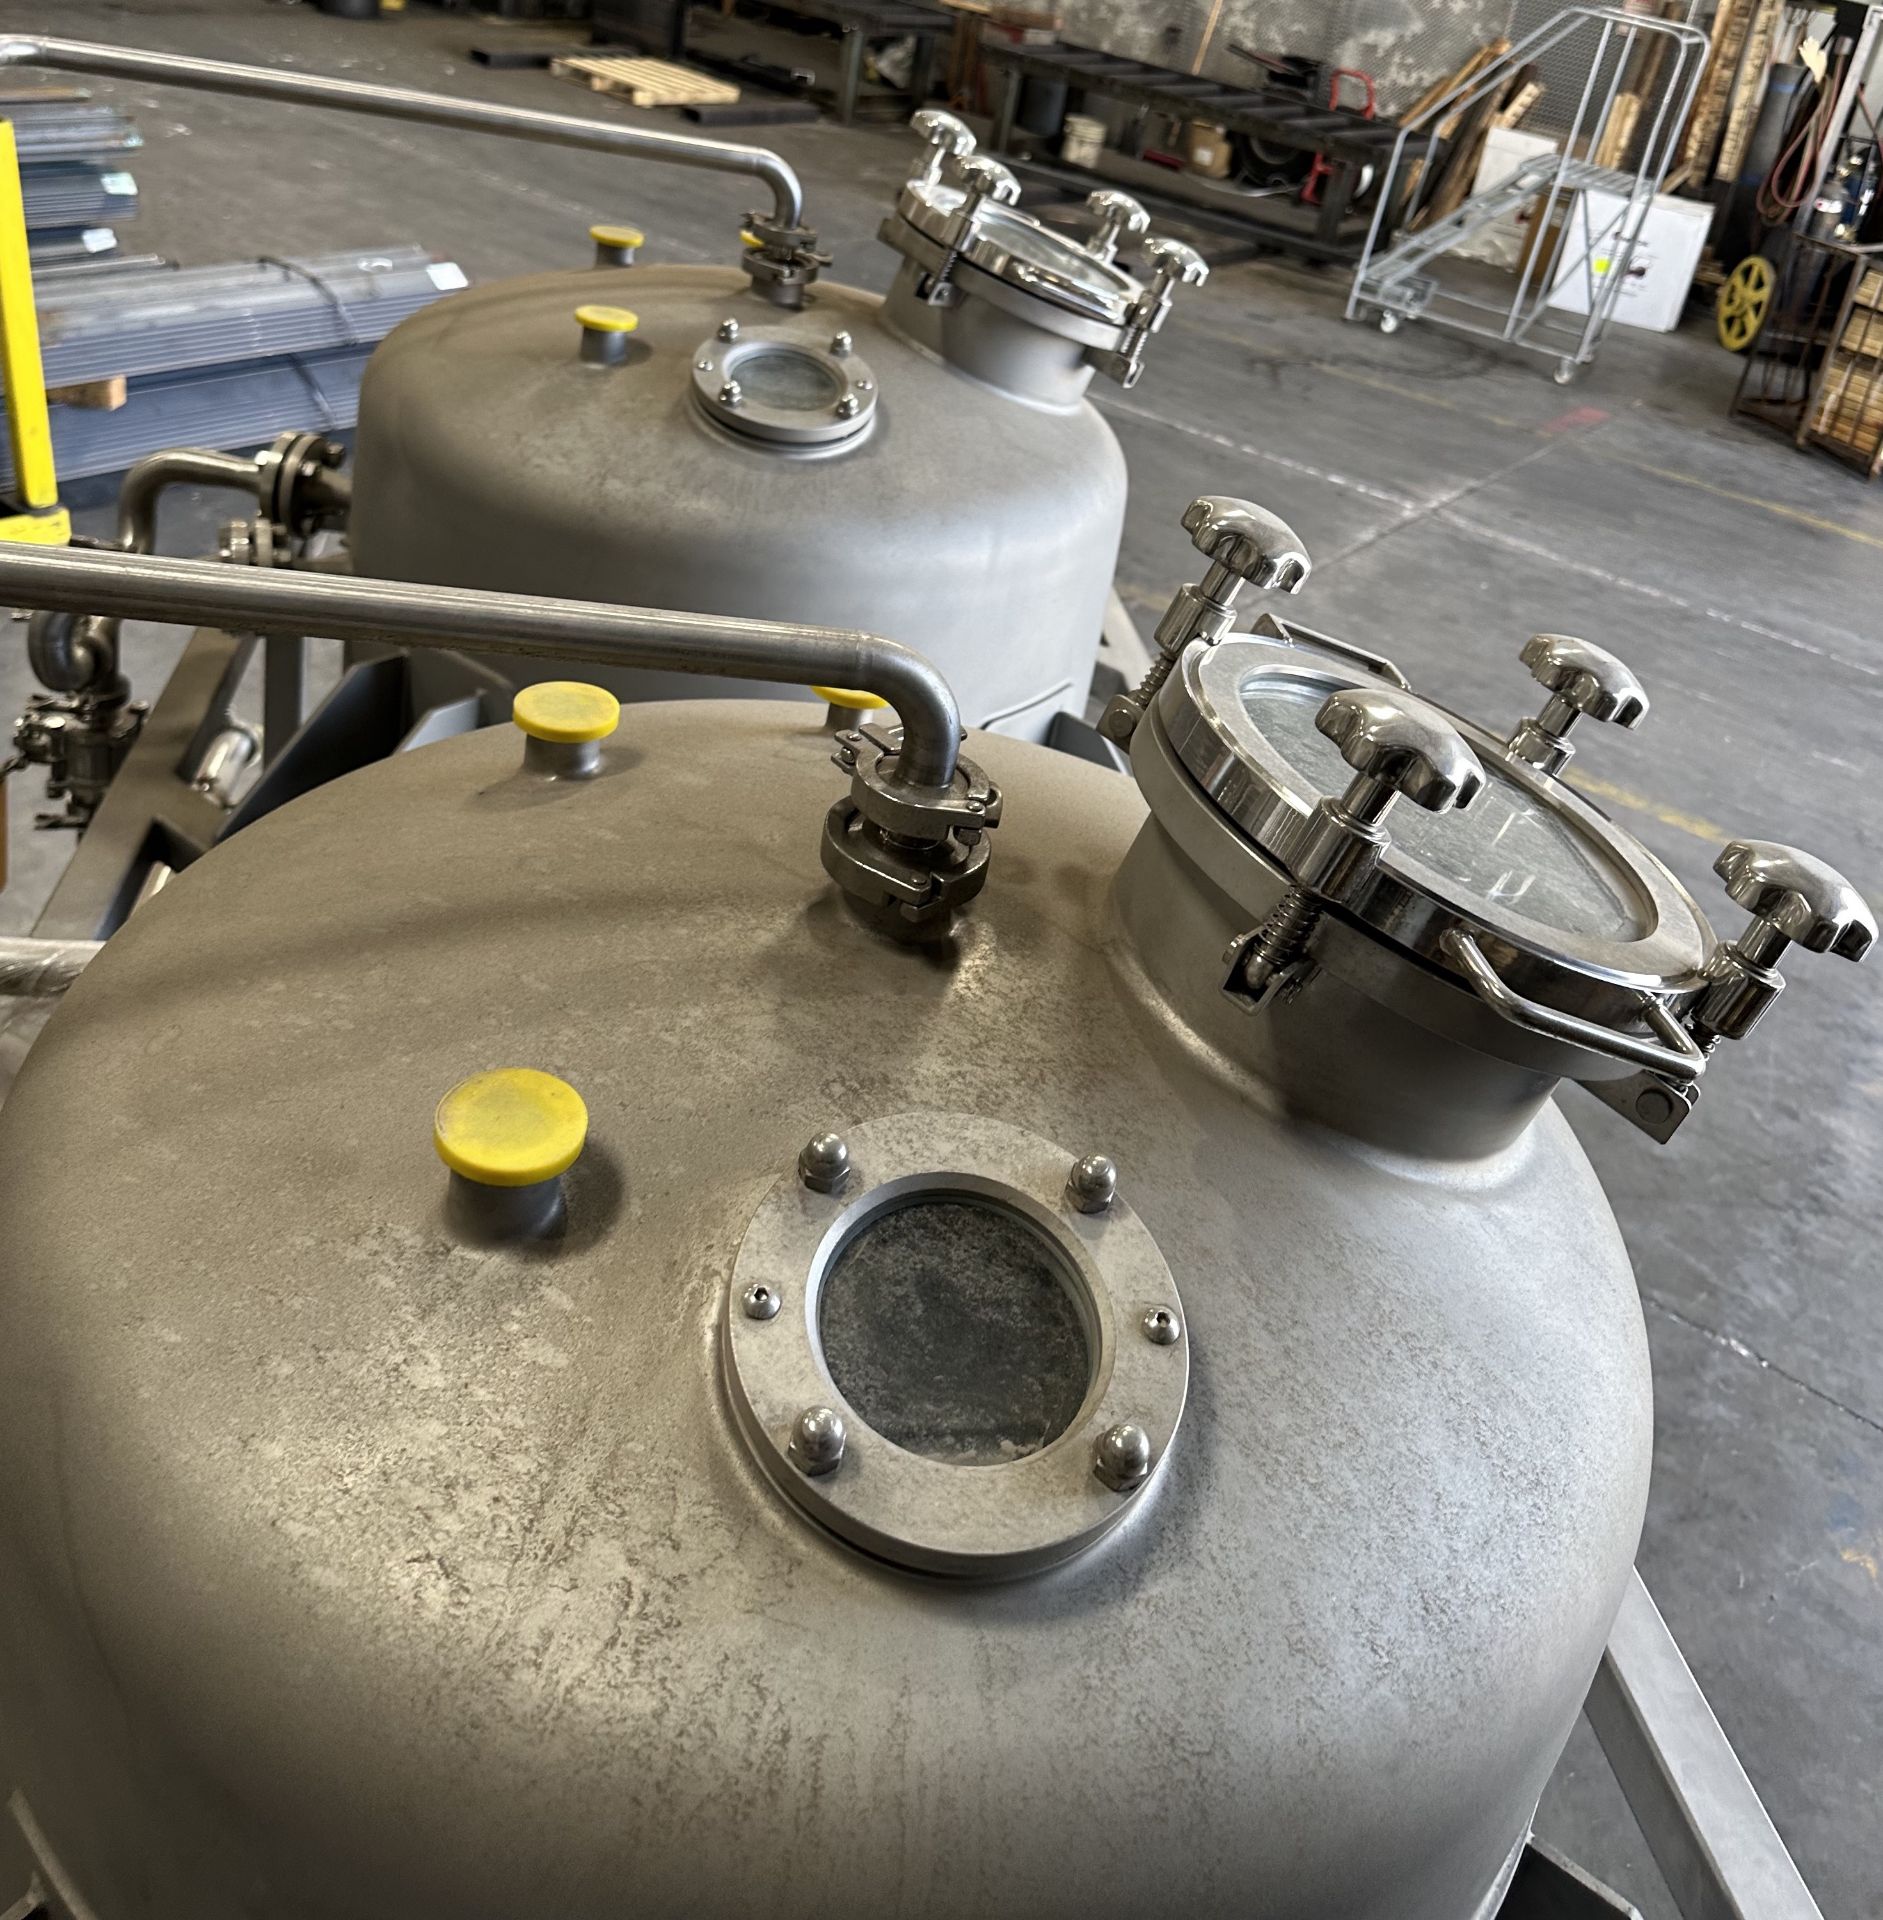 Unused Cedarstone Complete Ethanol Extraction Line w/ FFE, Filtration Skid, Centrifuge System EX200. - Image 24 of 89